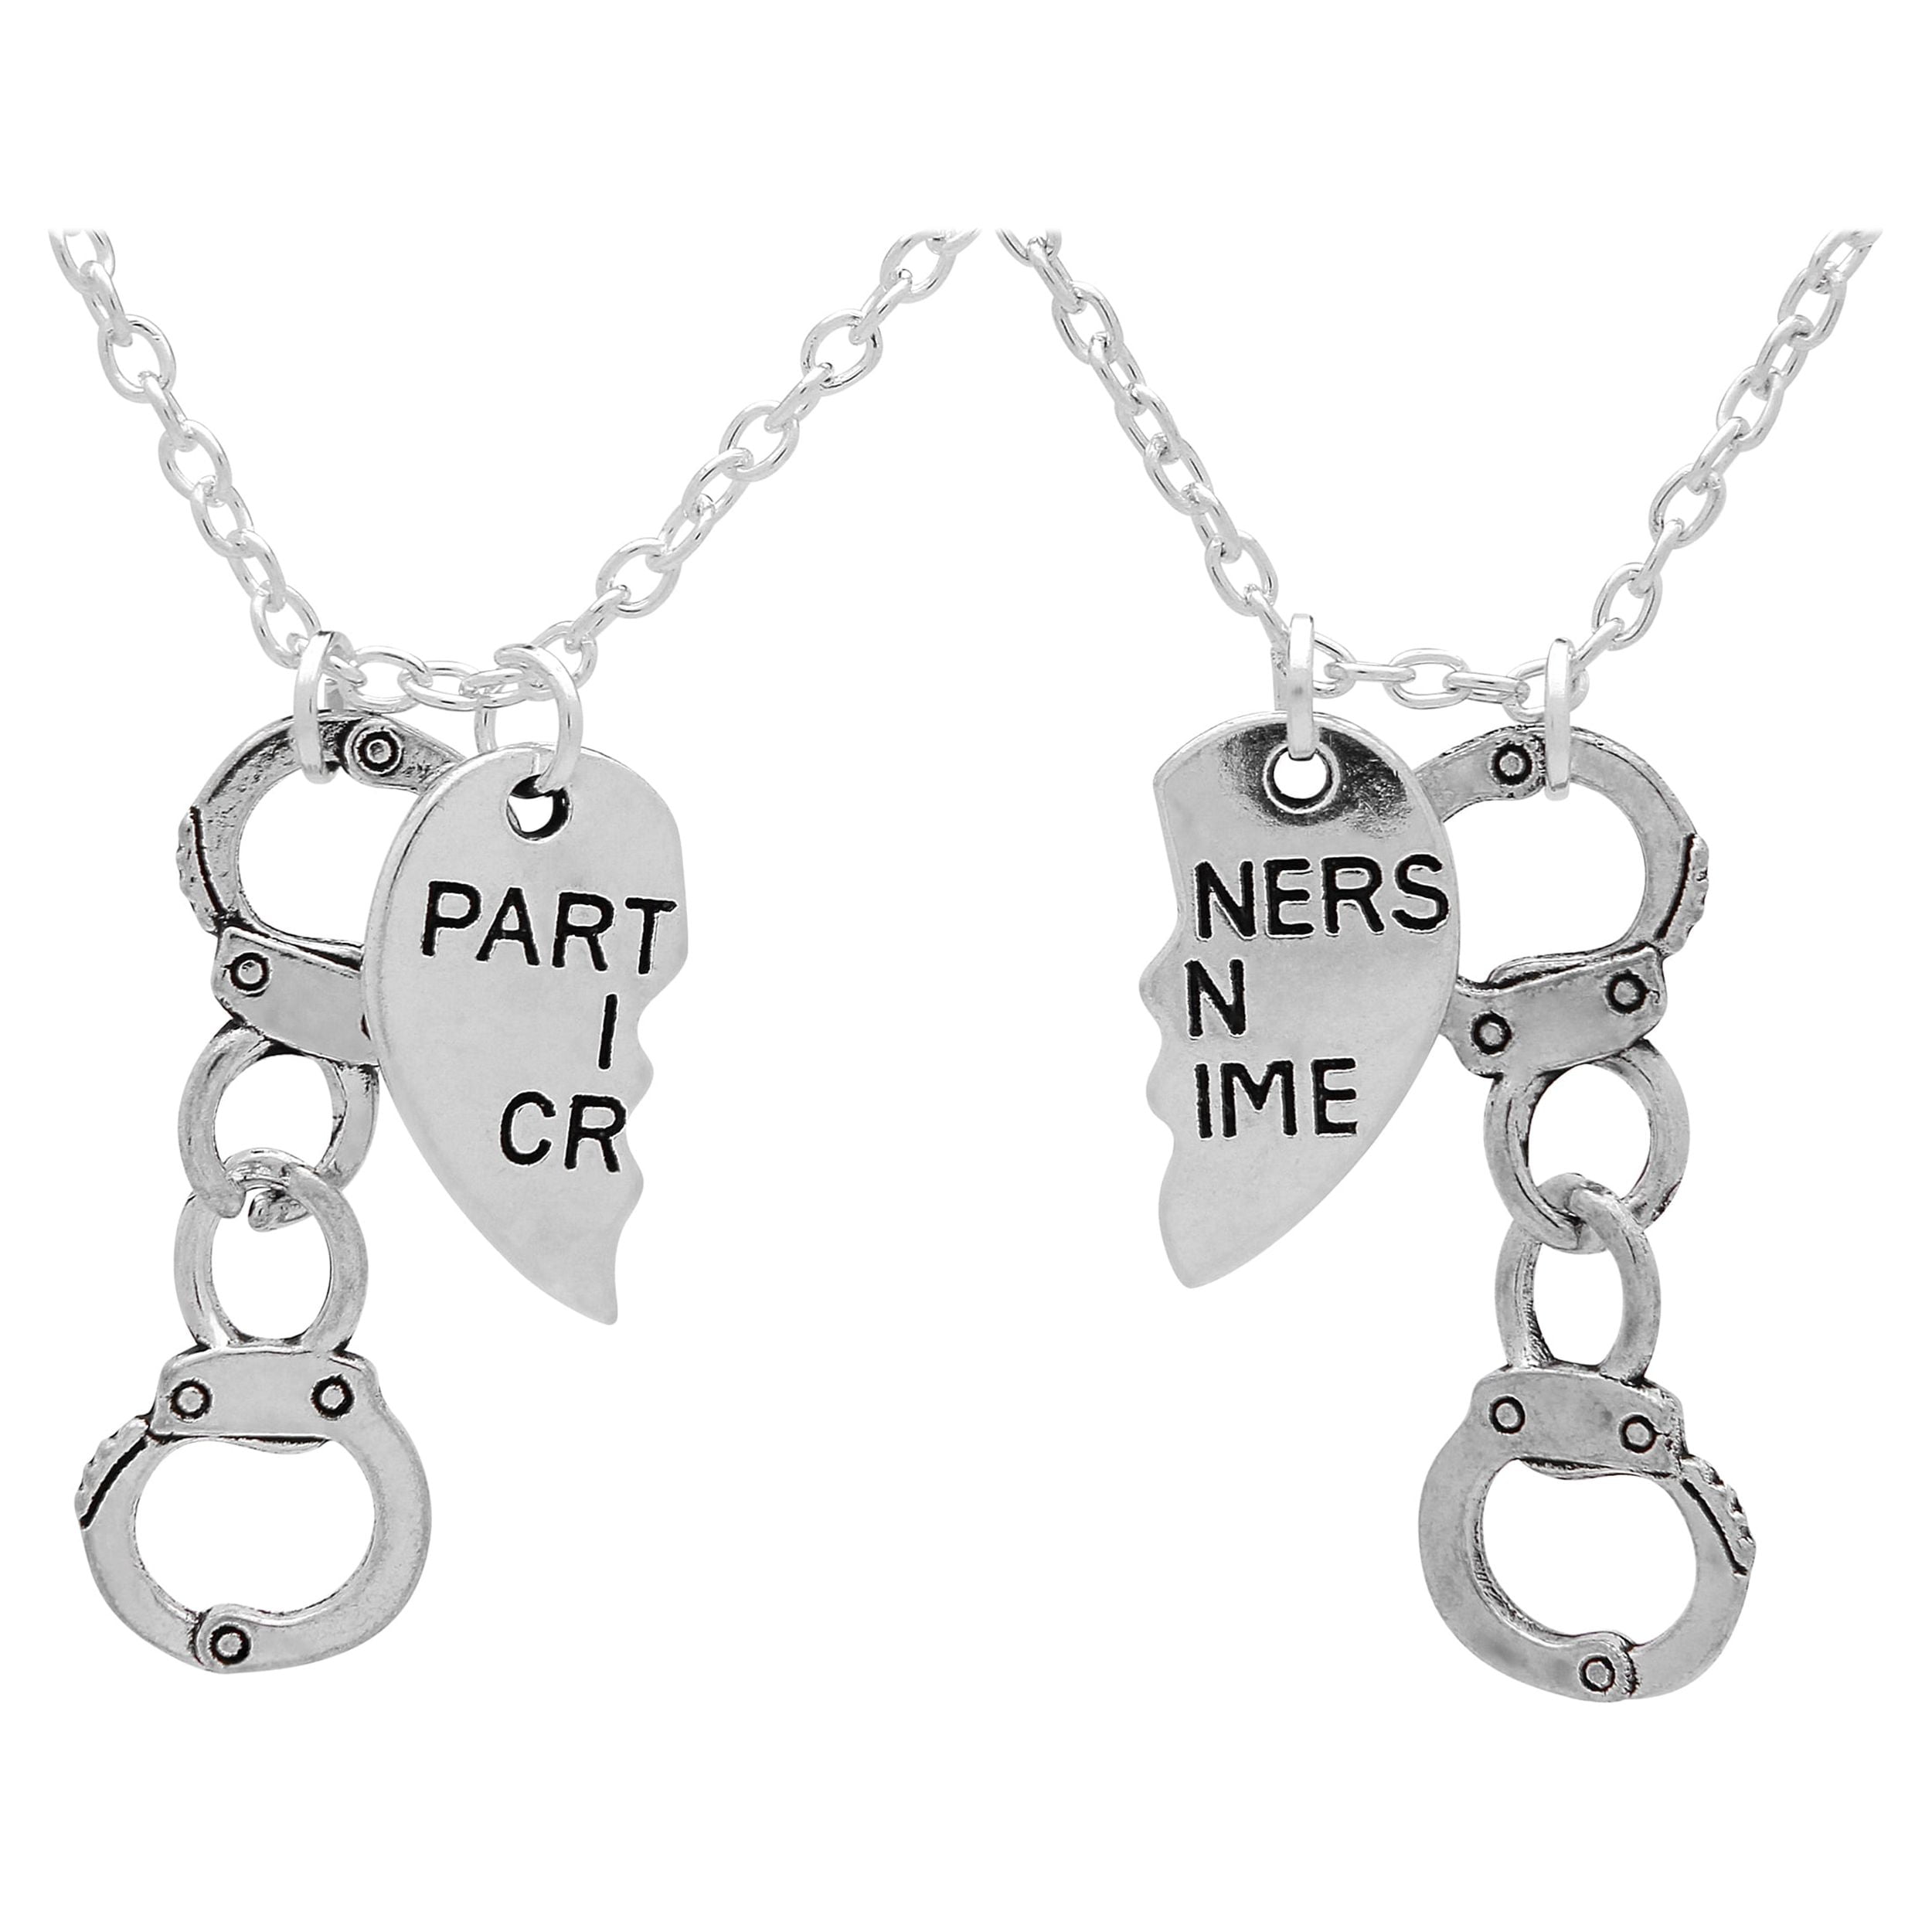 Partners in Crime Keychain Set of 2 Best Friend Gift Gift for Her Bestie Key  Chain Charms Key Chain Handcuff Keychain 